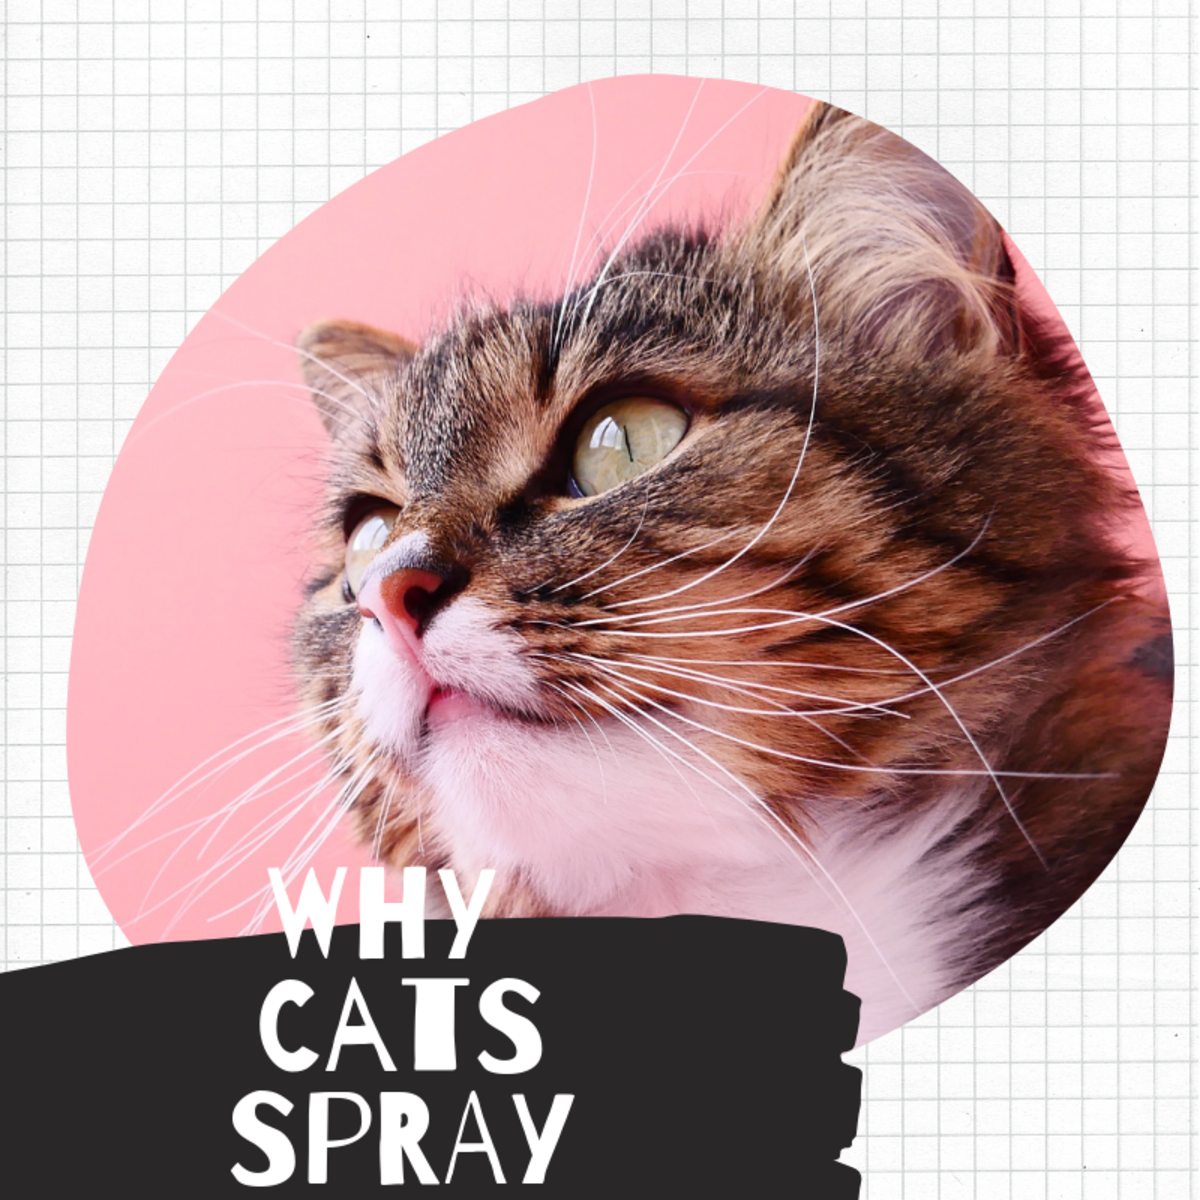 Why Is My Cat Spraying, and How Can I Fix It?